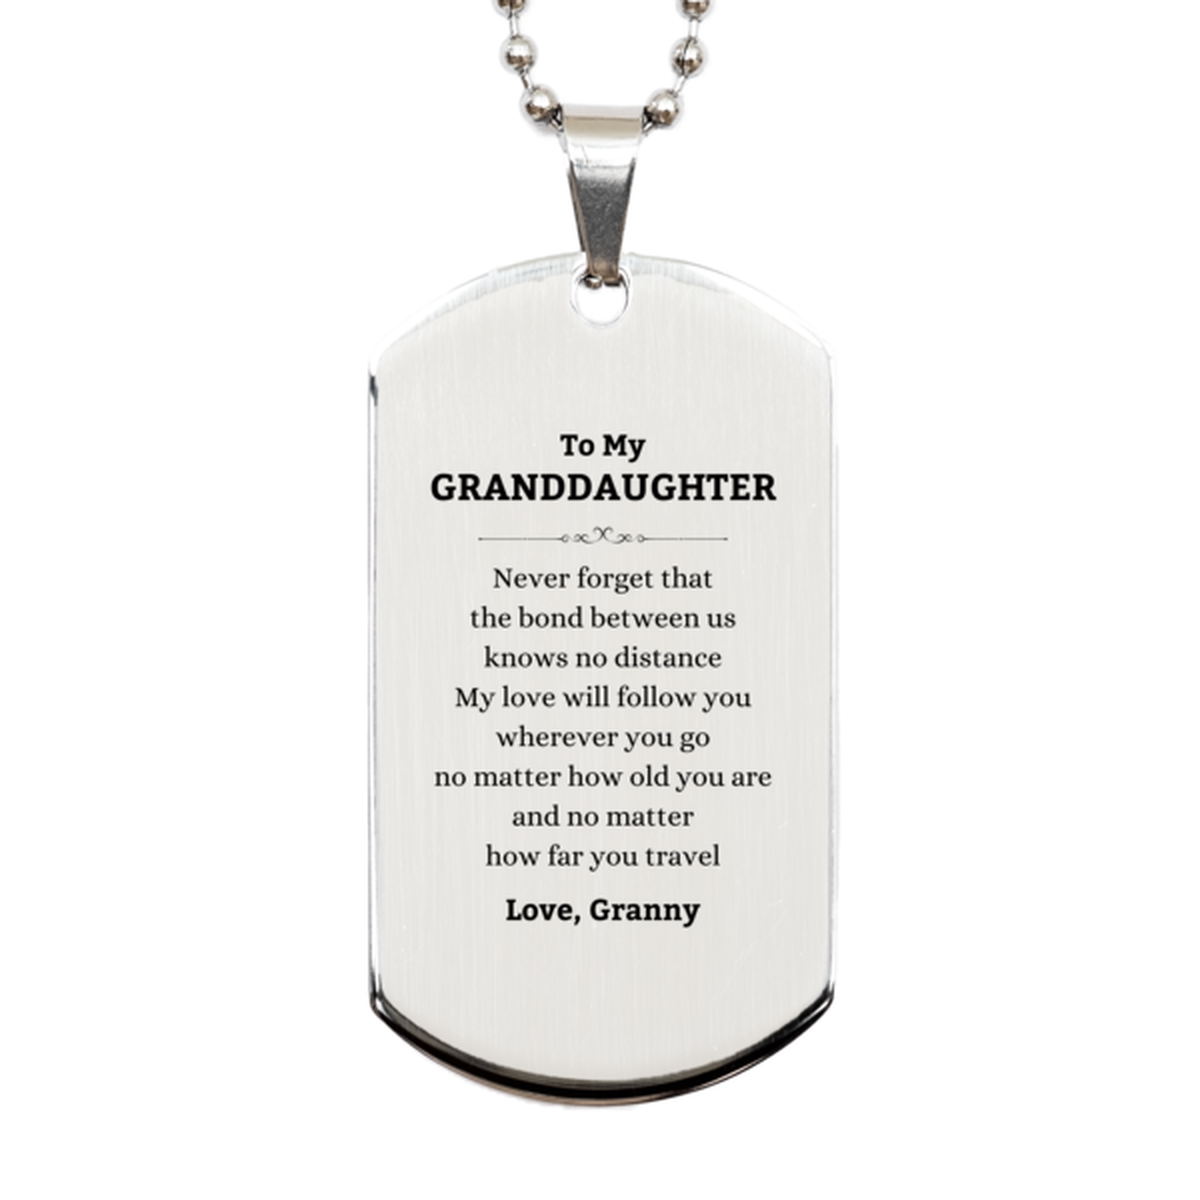 Granddaughter Birthday Gifts from Granny, Adjustable Silver Dog Tag for Granddaughter Christmas Graduation Unique Gifts Granddaughter Never forget that the bond between us knows no distance. Love, Granny